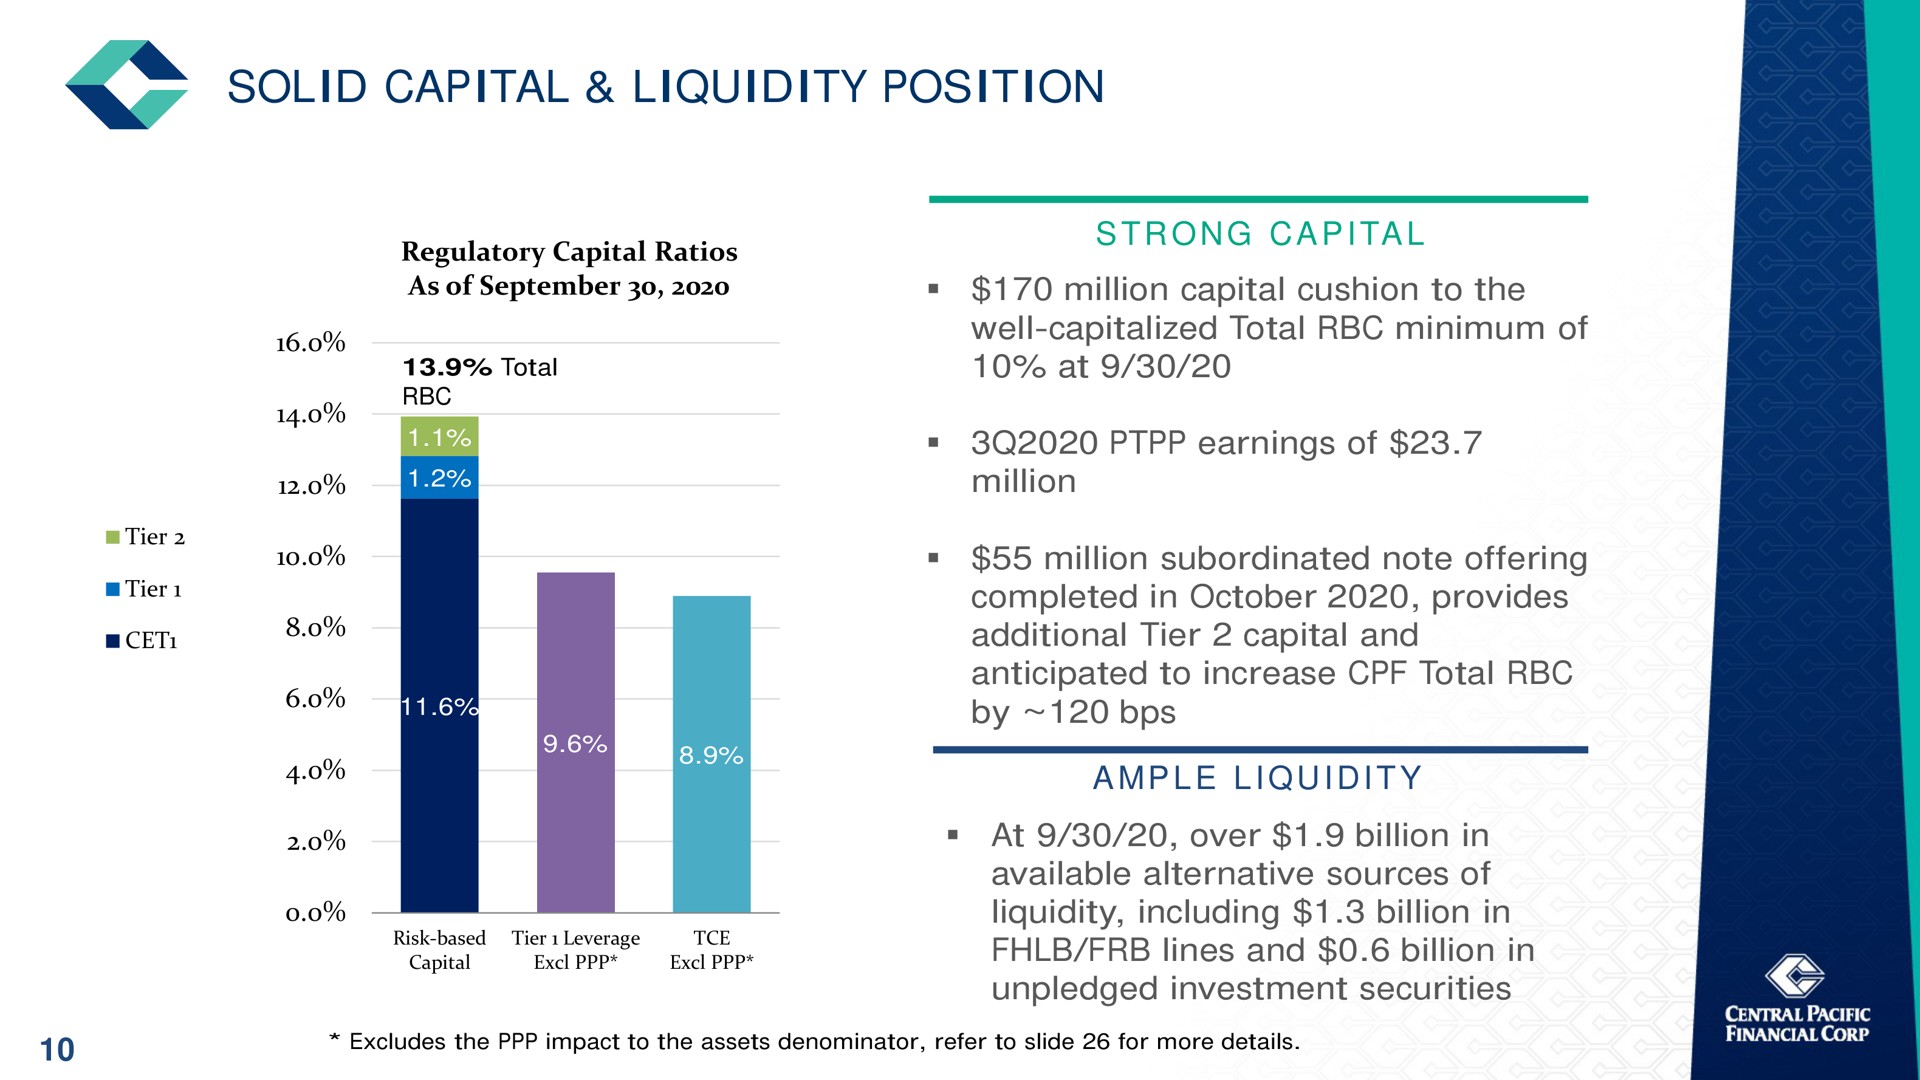 solid capital liquidity position a ample lines and billion in | Central Pacific Financial